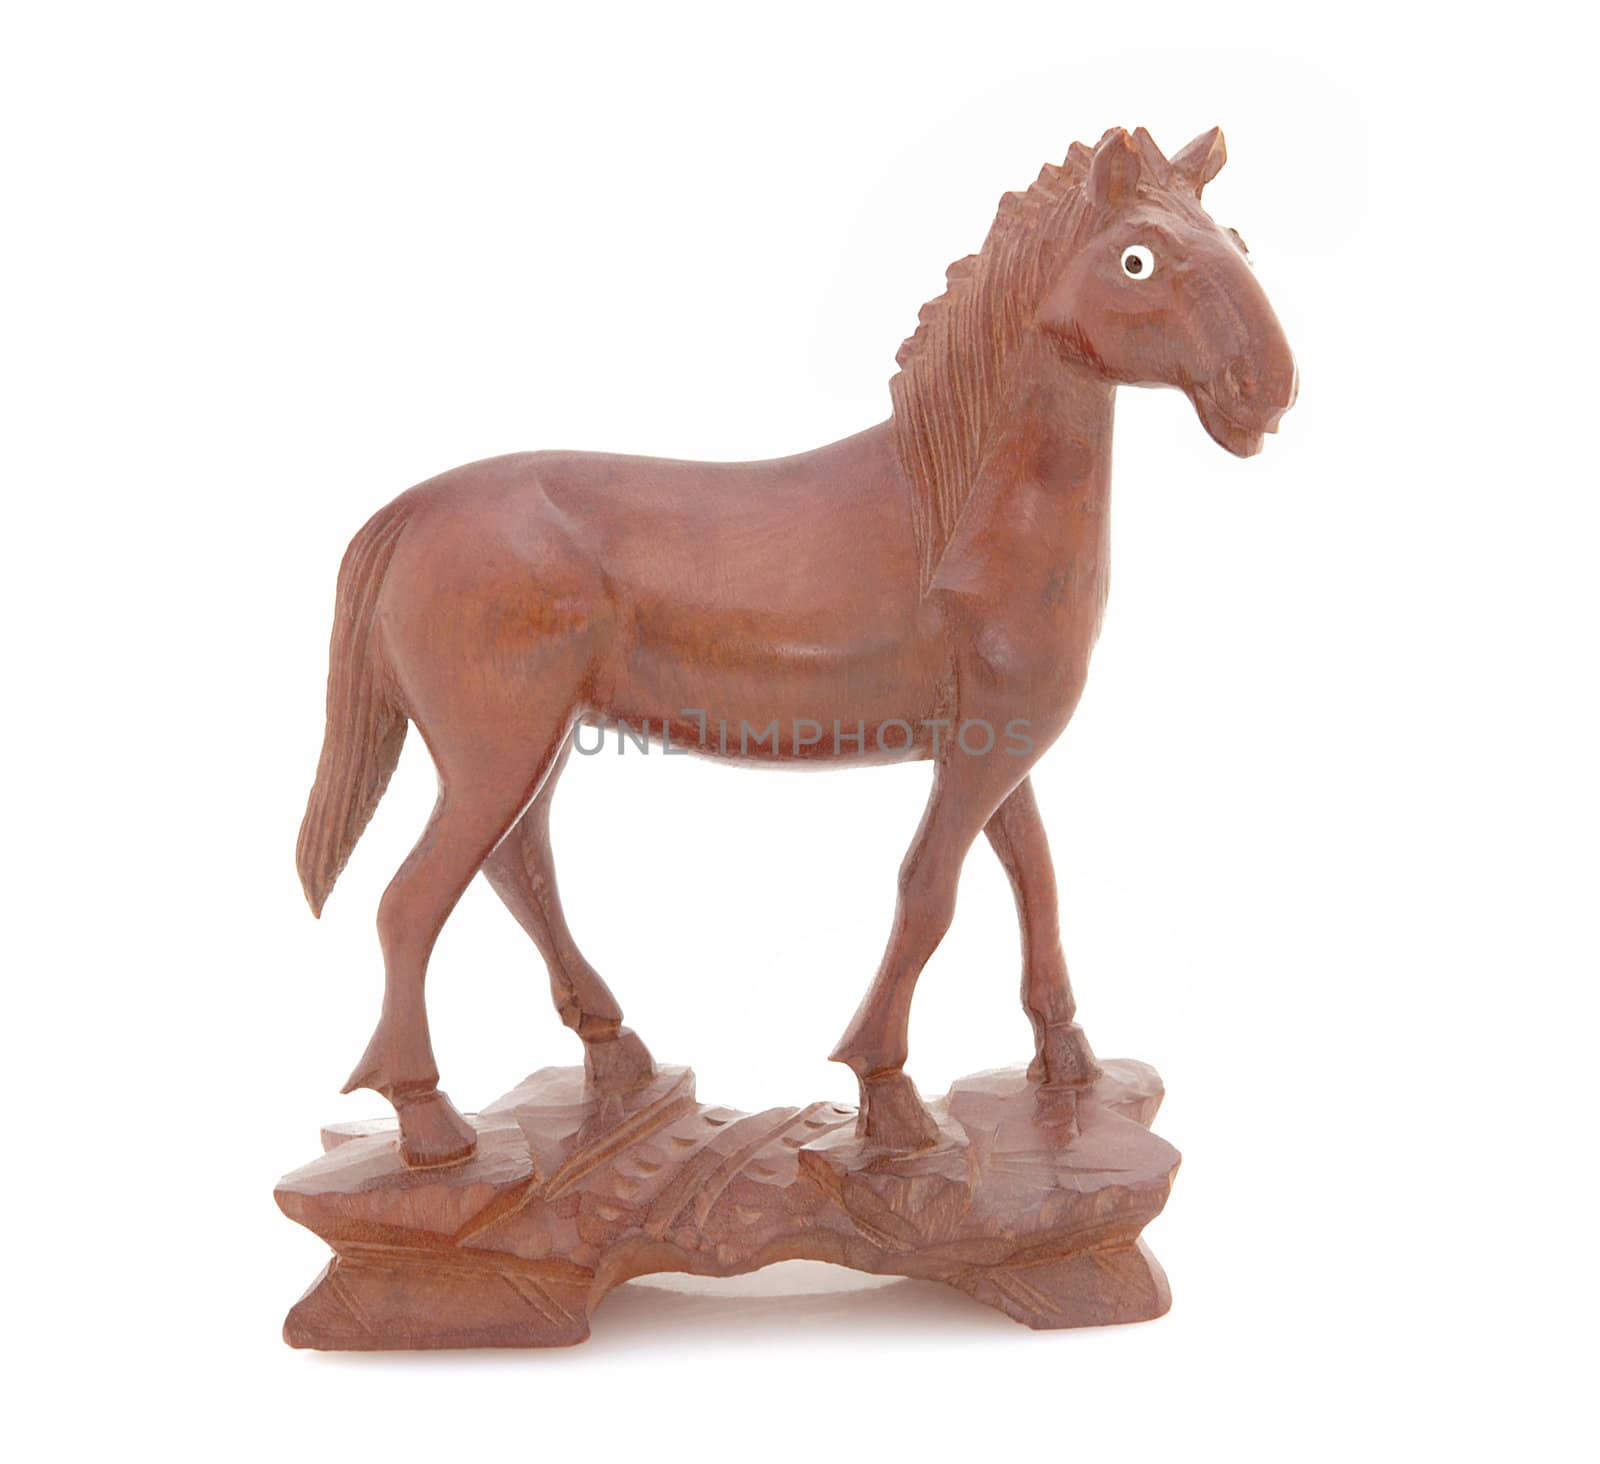 Antique wooden statue of a horse.